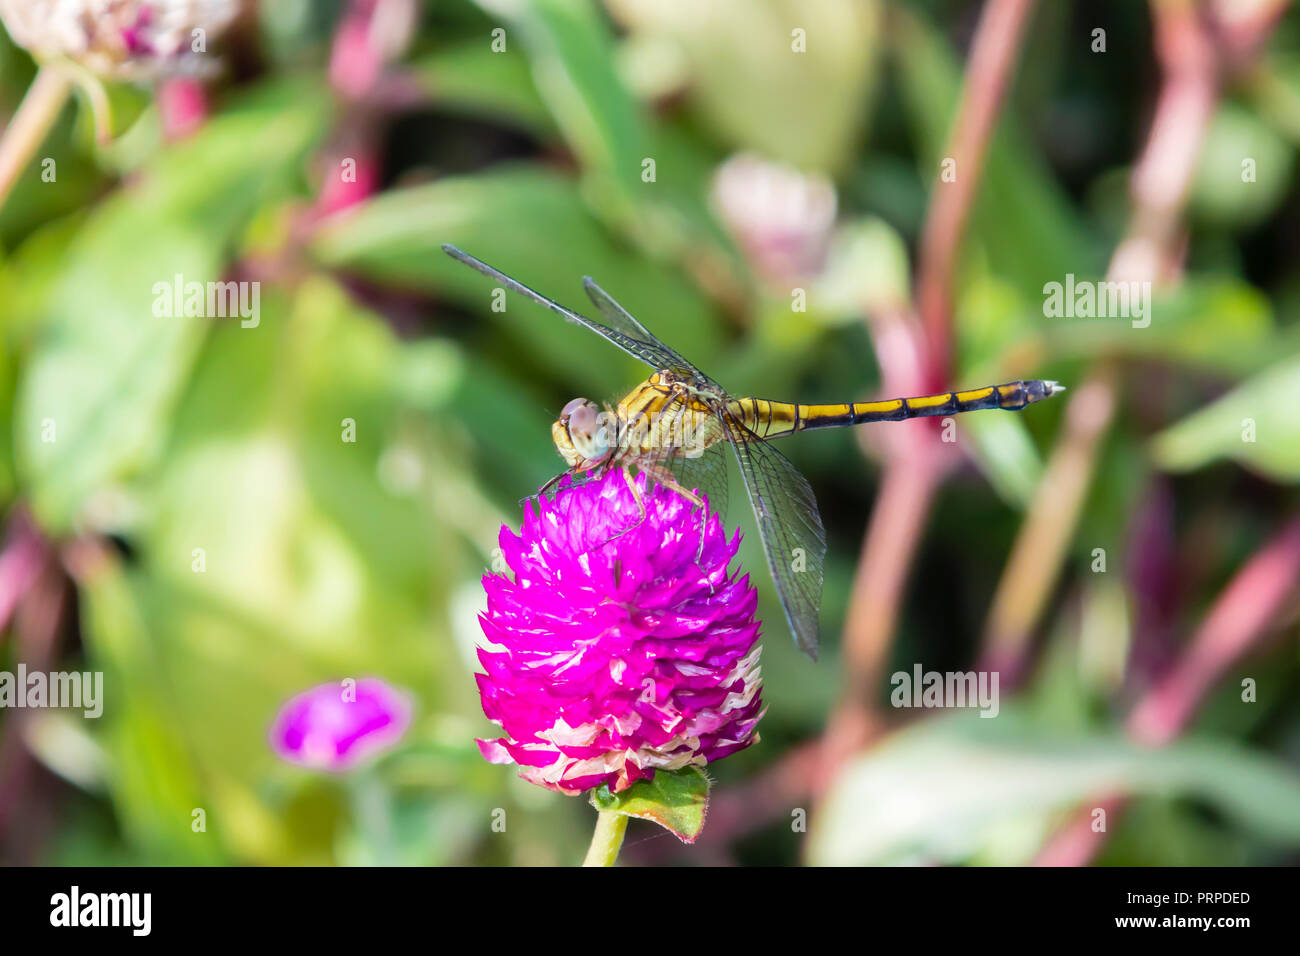 long-legged marsh glider or dancing dropwing (Trithemis pallidinervis) dragonfly from Kerala in South India Stock Photo